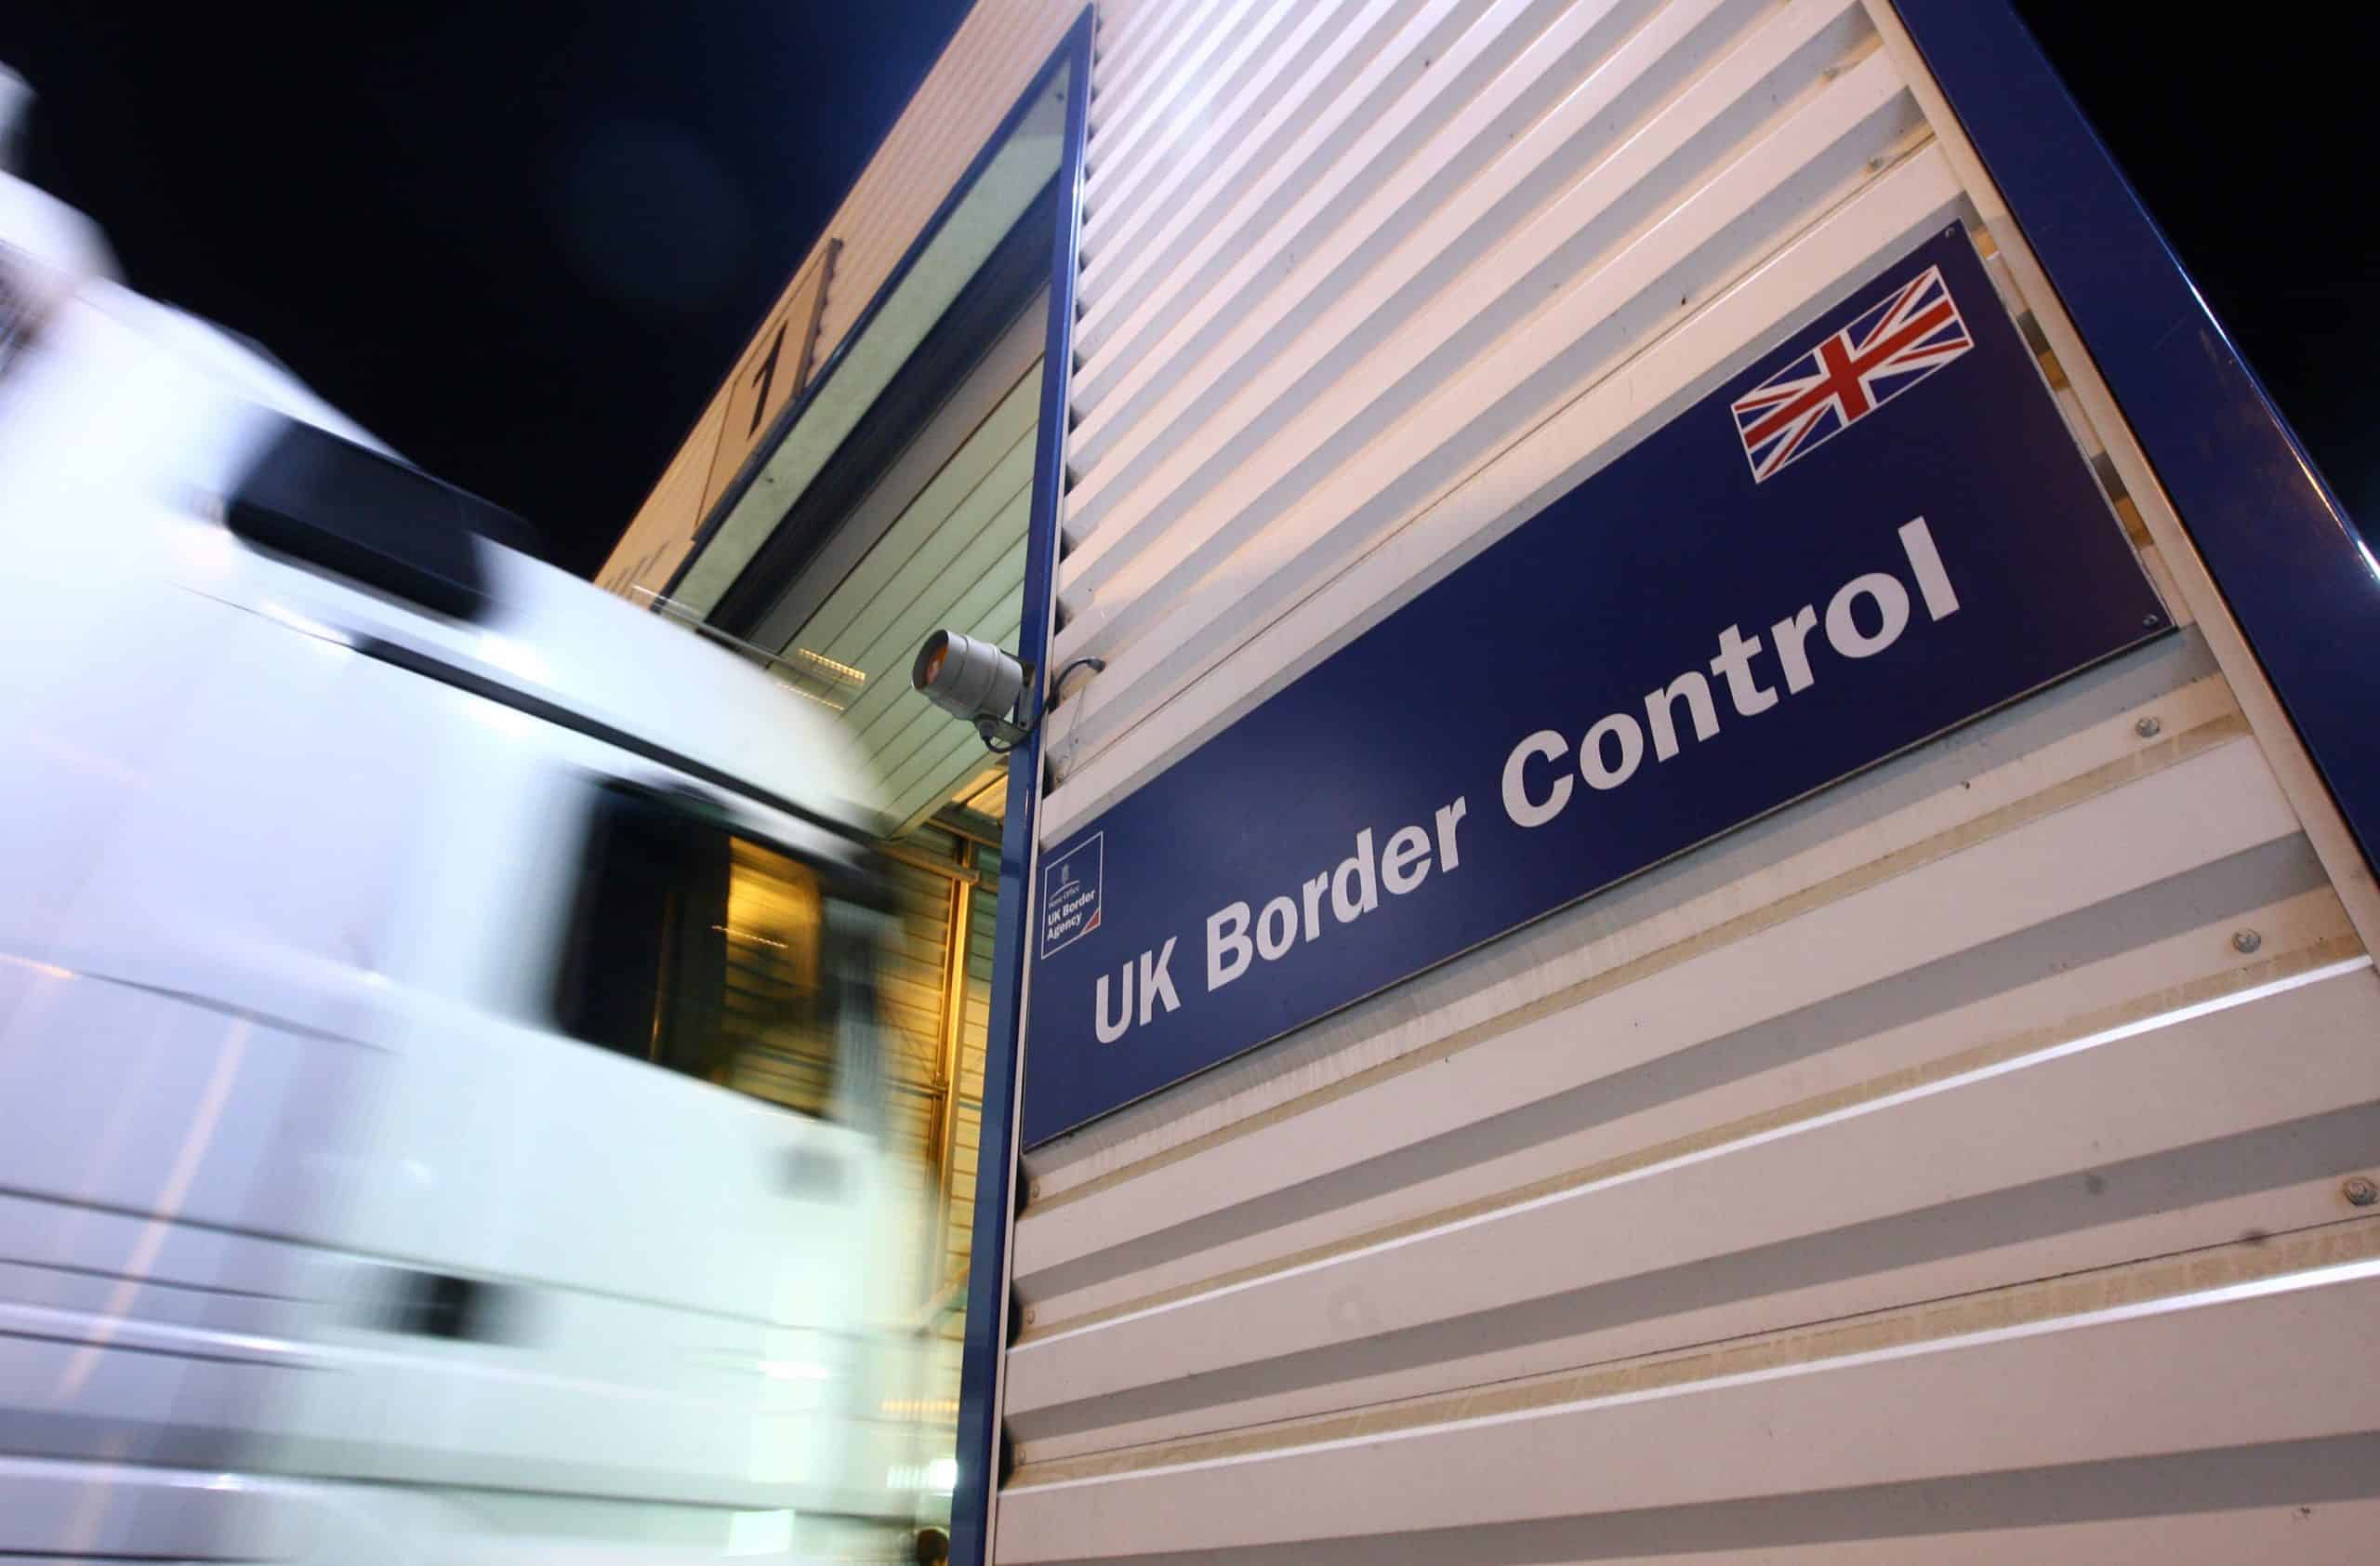 ‘We have become the laughingstock of Europe’: Industry chief blasts UK border strategy